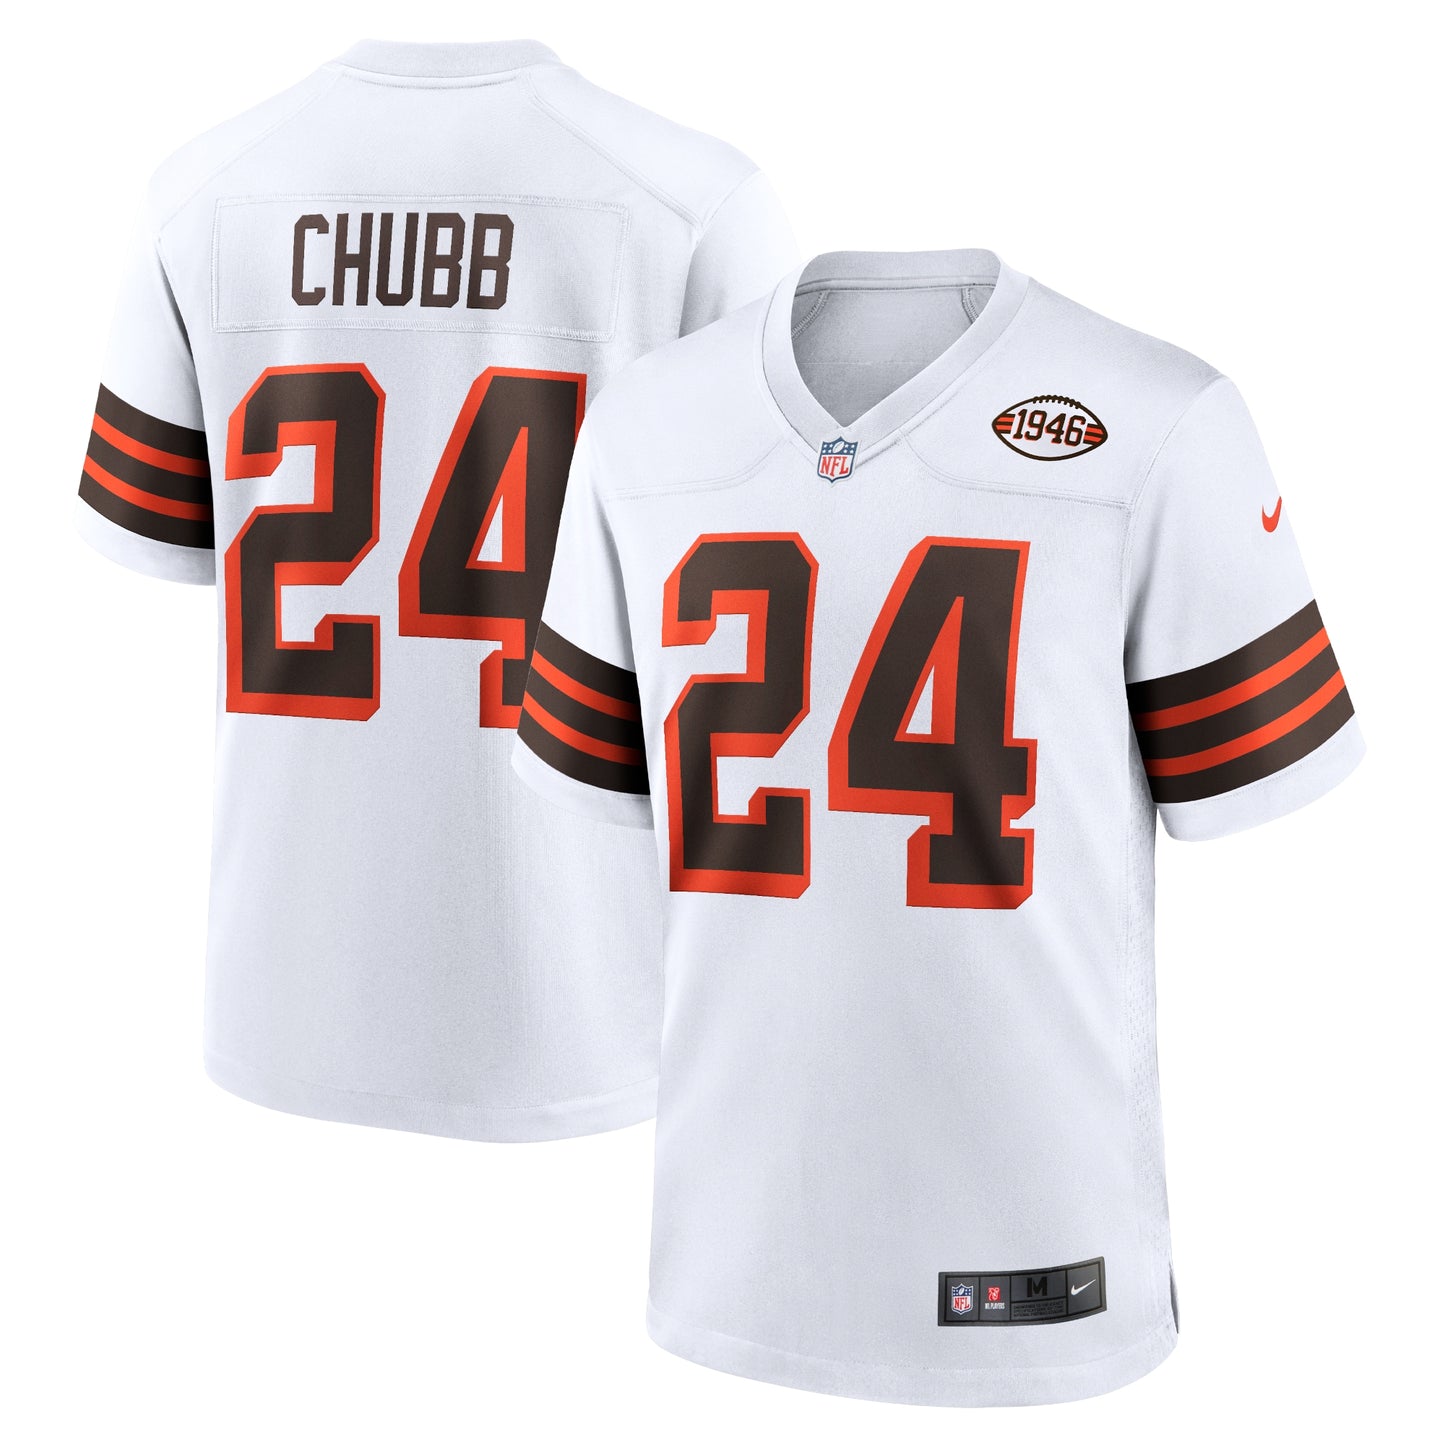 Nick Chubb Cleveland Browns Nike 1946 Collection Alternate Game Jersey - White